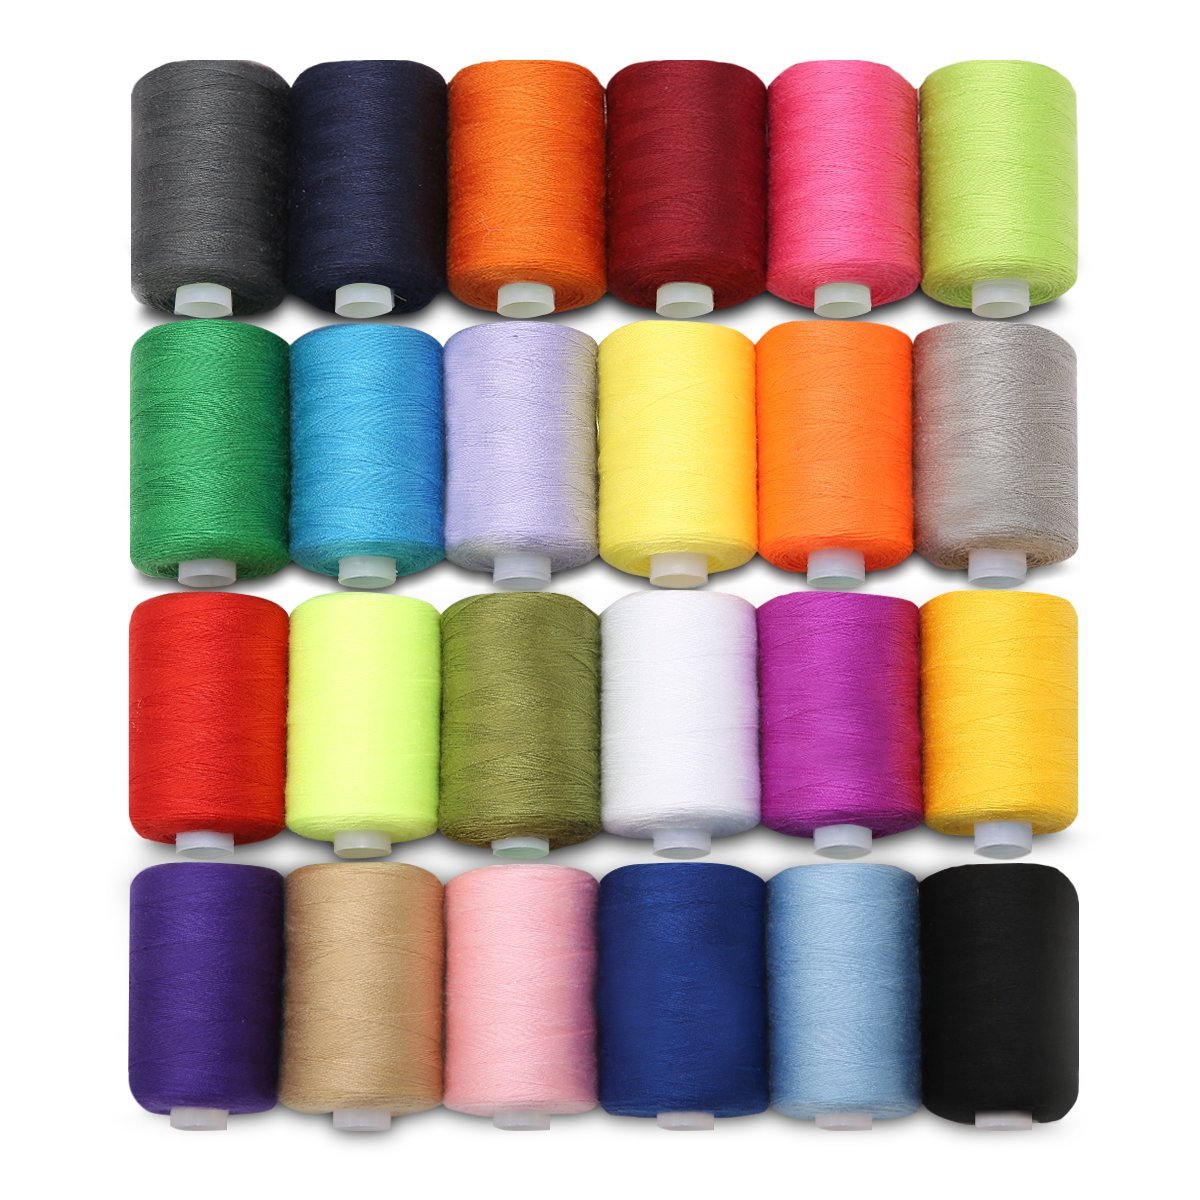 Spool Sewing Thread Assortment Coil 24 Color 218 Yards Each Polyester Thread Sewing Kit All Purpose Polyester Thread for Hand and Machine Sewing